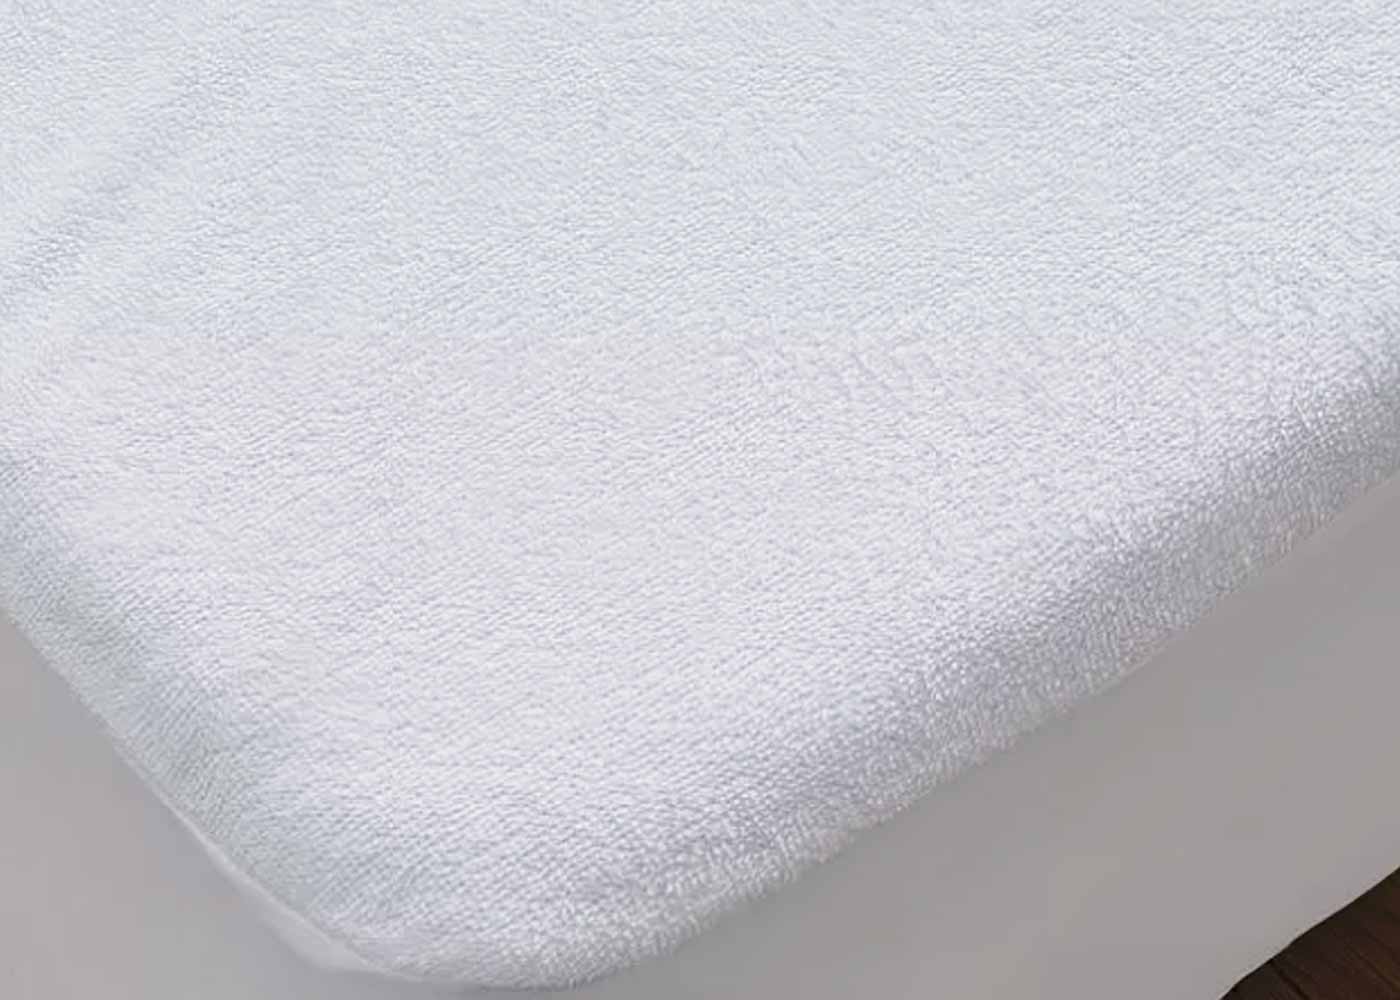 affordable-waterproof-mattress-cover-Hotel-laplace-zoom